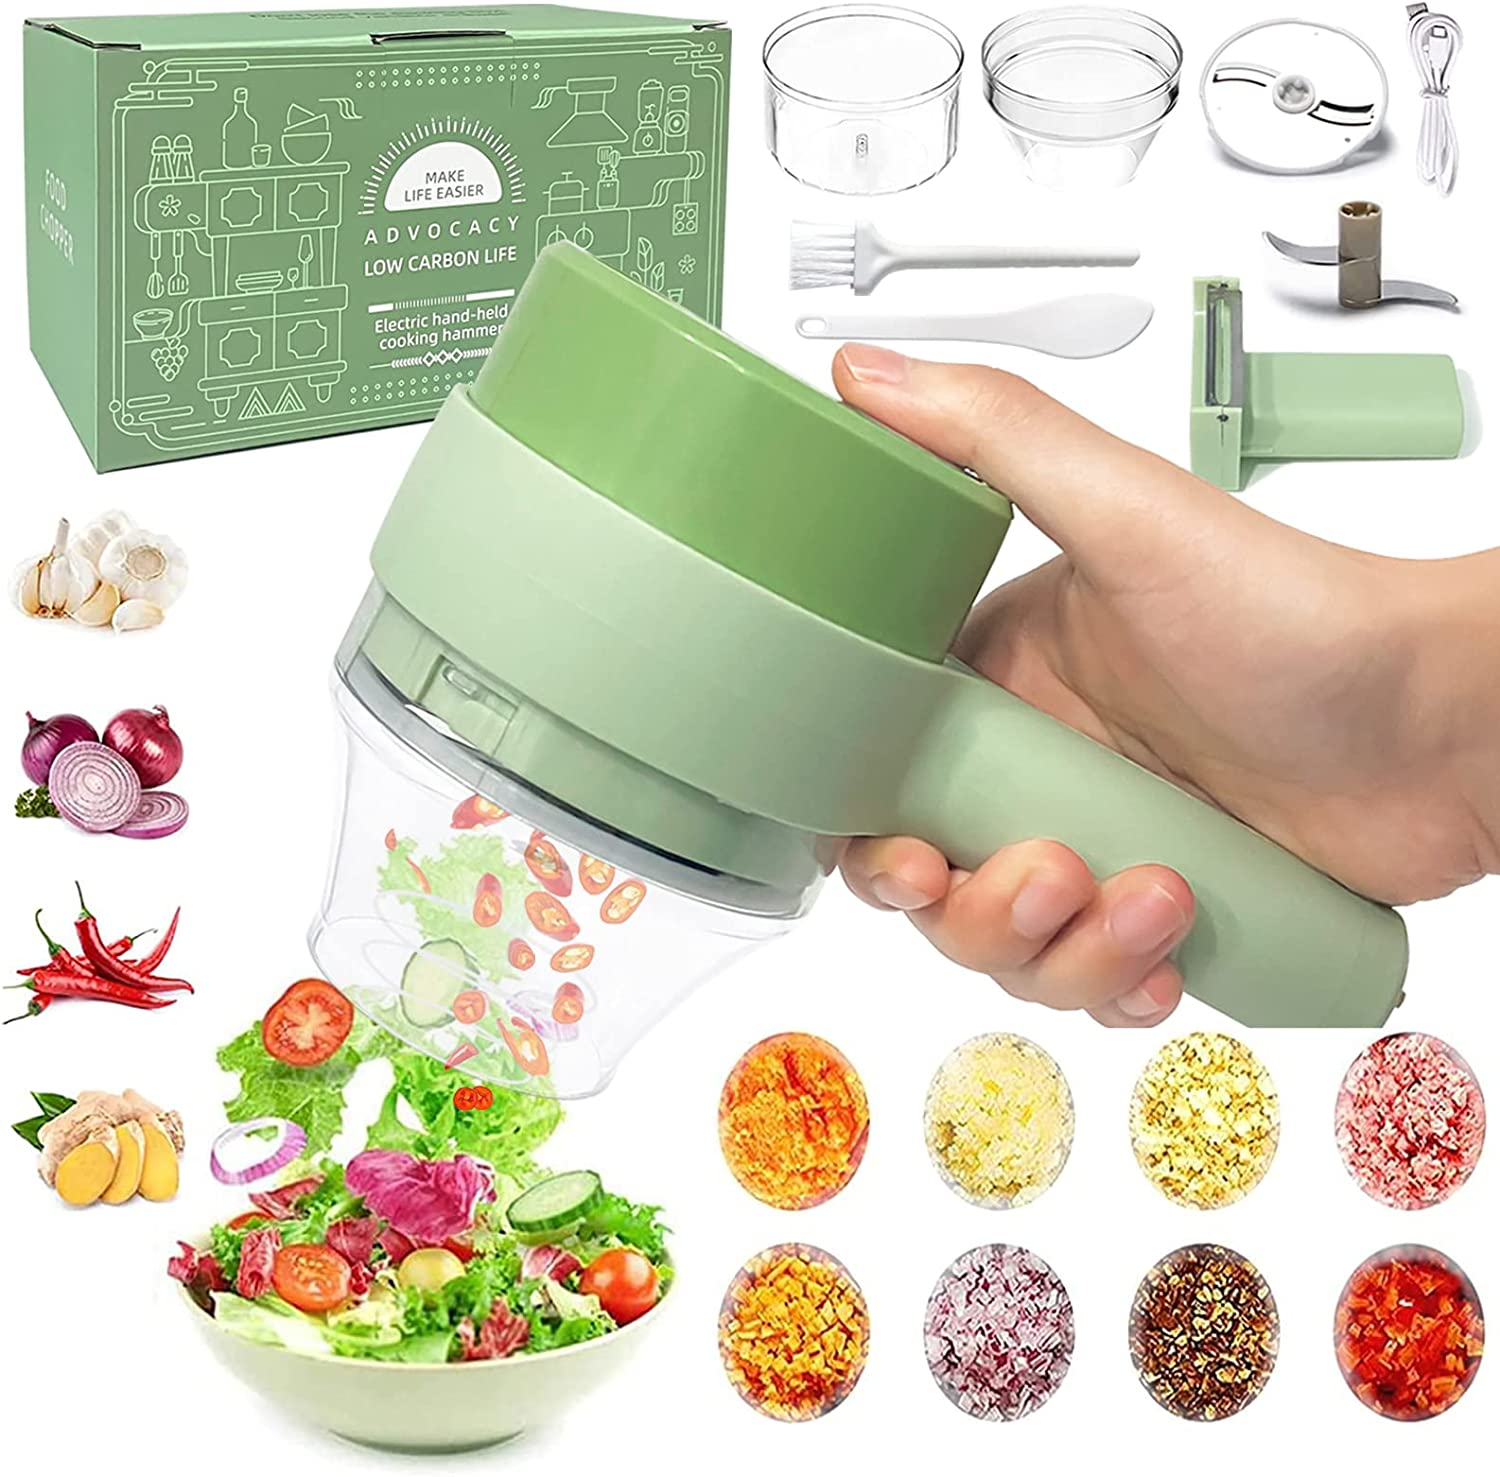 Kitchen Goods Electric Vegetable Cutter Set - 4 in 1 Portable,  Rechargeable, Wireless Food Processor & Chopper Machine for Pepper, Garlic,  Onion